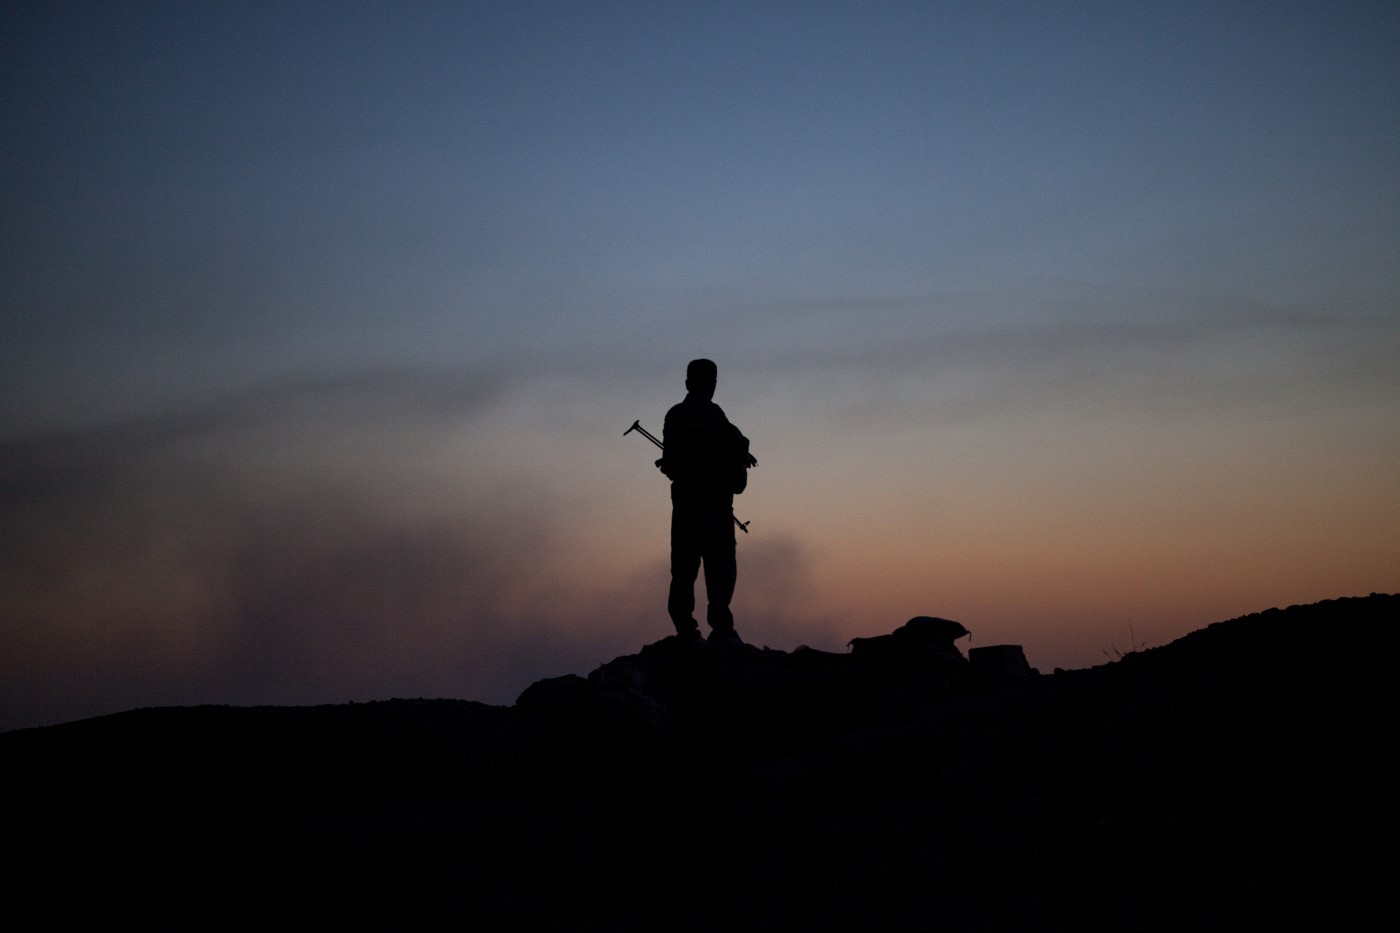 A Peshmerga controlling a potential attack by the Islamic State to one of the strategic points in the Tuz Khurmatu front line. In twilight background, rising smoke reveals IS members activity. Tuz Khurmatu; Kurdistan, Iraq. June 19, 2017